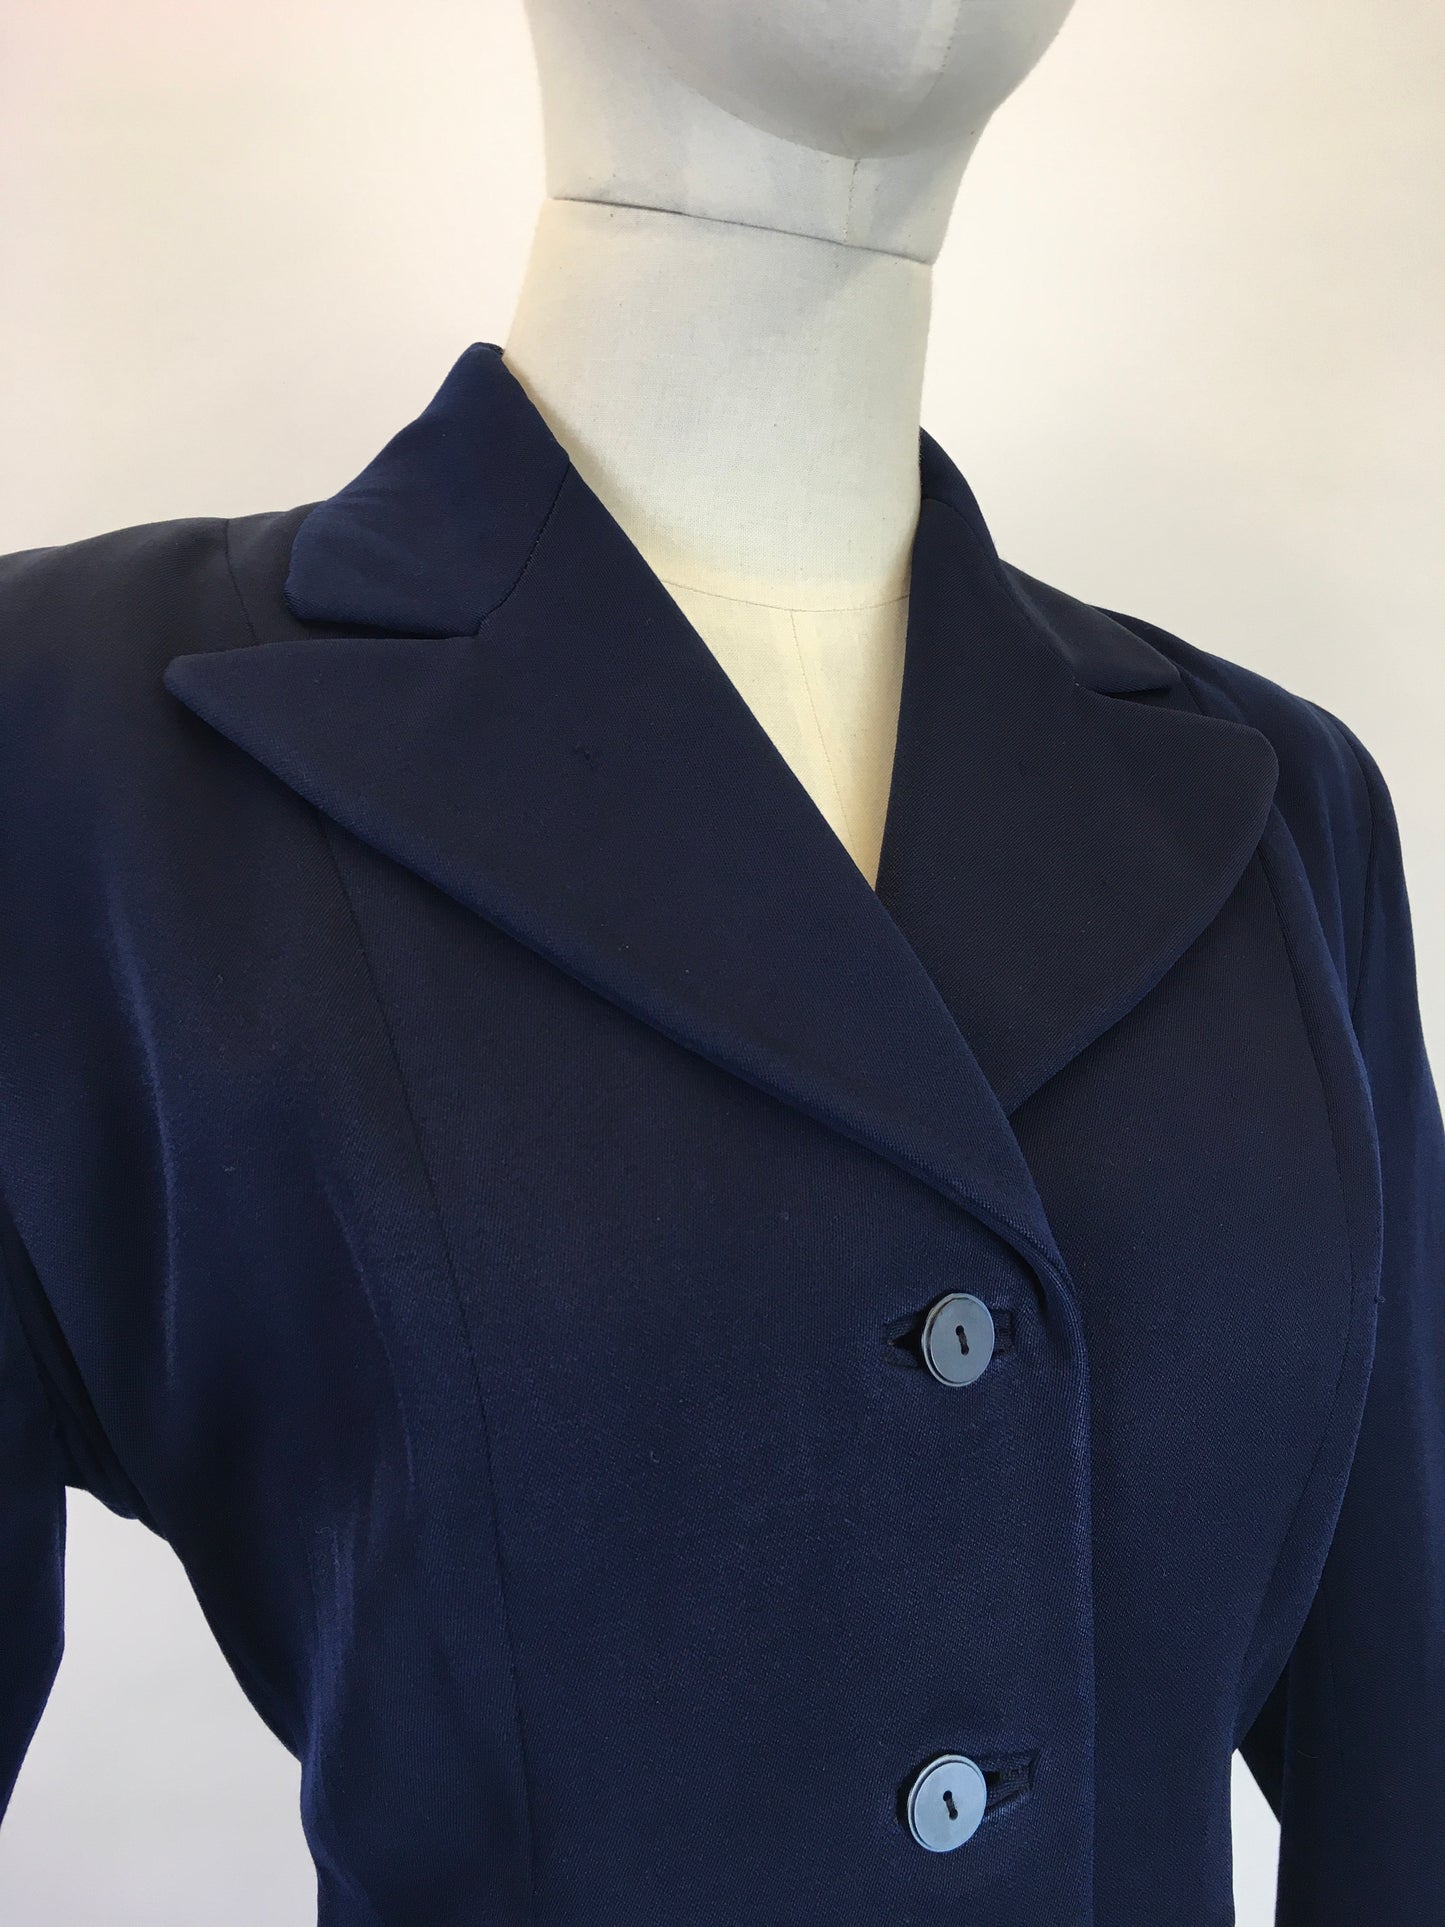 Original 1940’s Beautiful Navy Jacket - With A Classic 1940’s Silhouette and Details